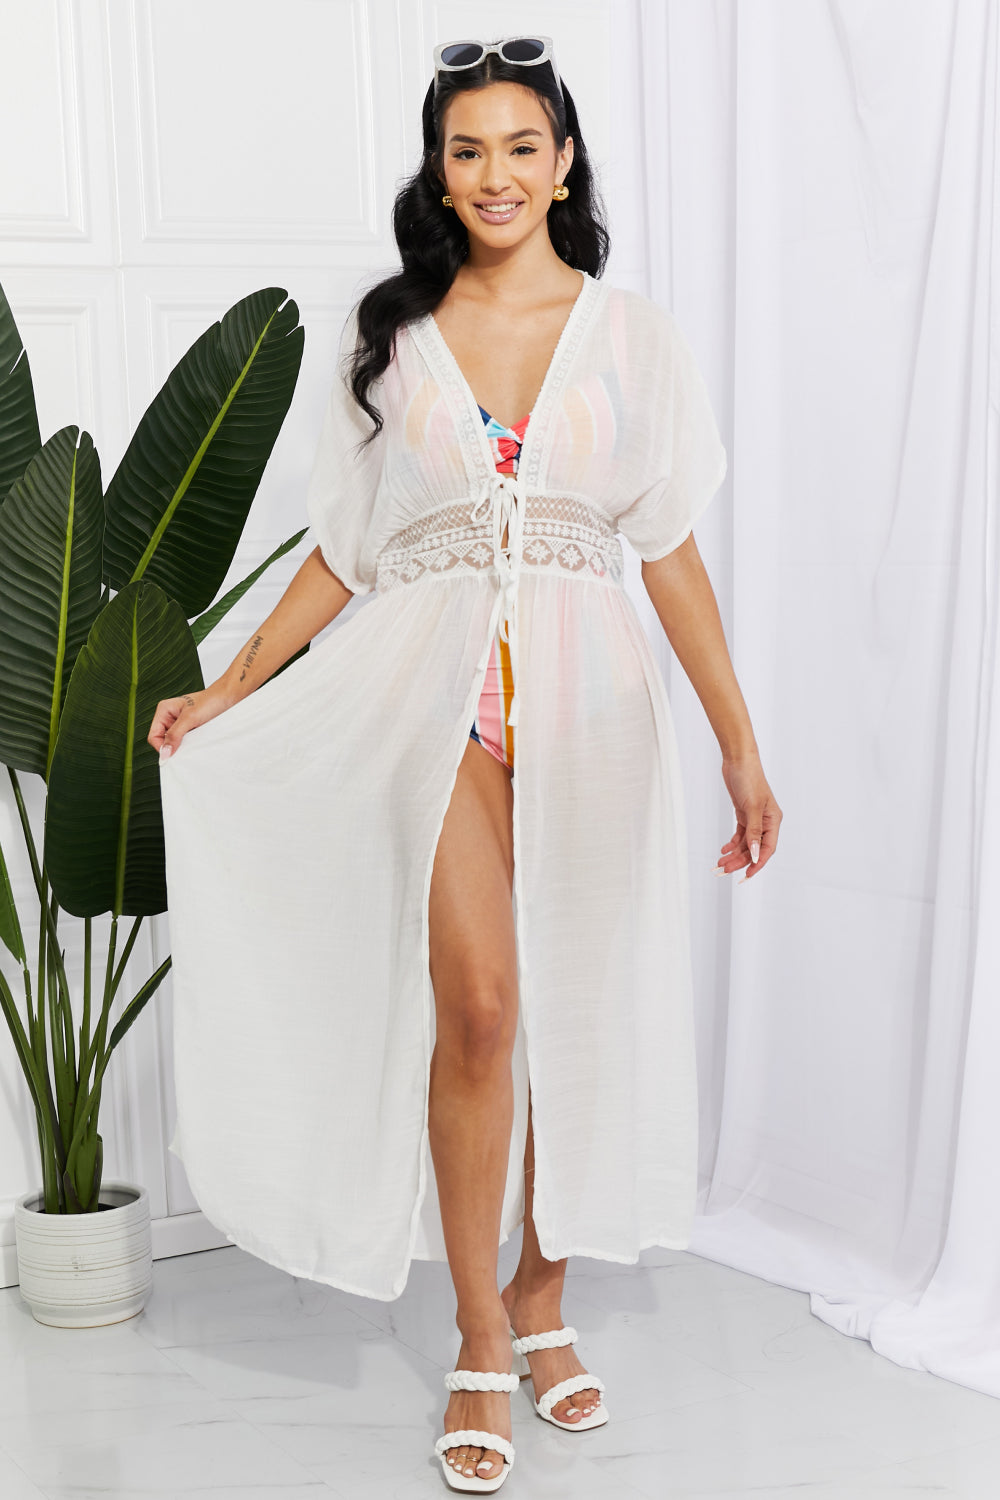 This maxi cover-up is perfect for finishing off your swim day look. From its double tie detail to its crochet-trimmed waistband, this lightweight piece is just what you need for summer vacation. **Ship within USA only, not available for international market